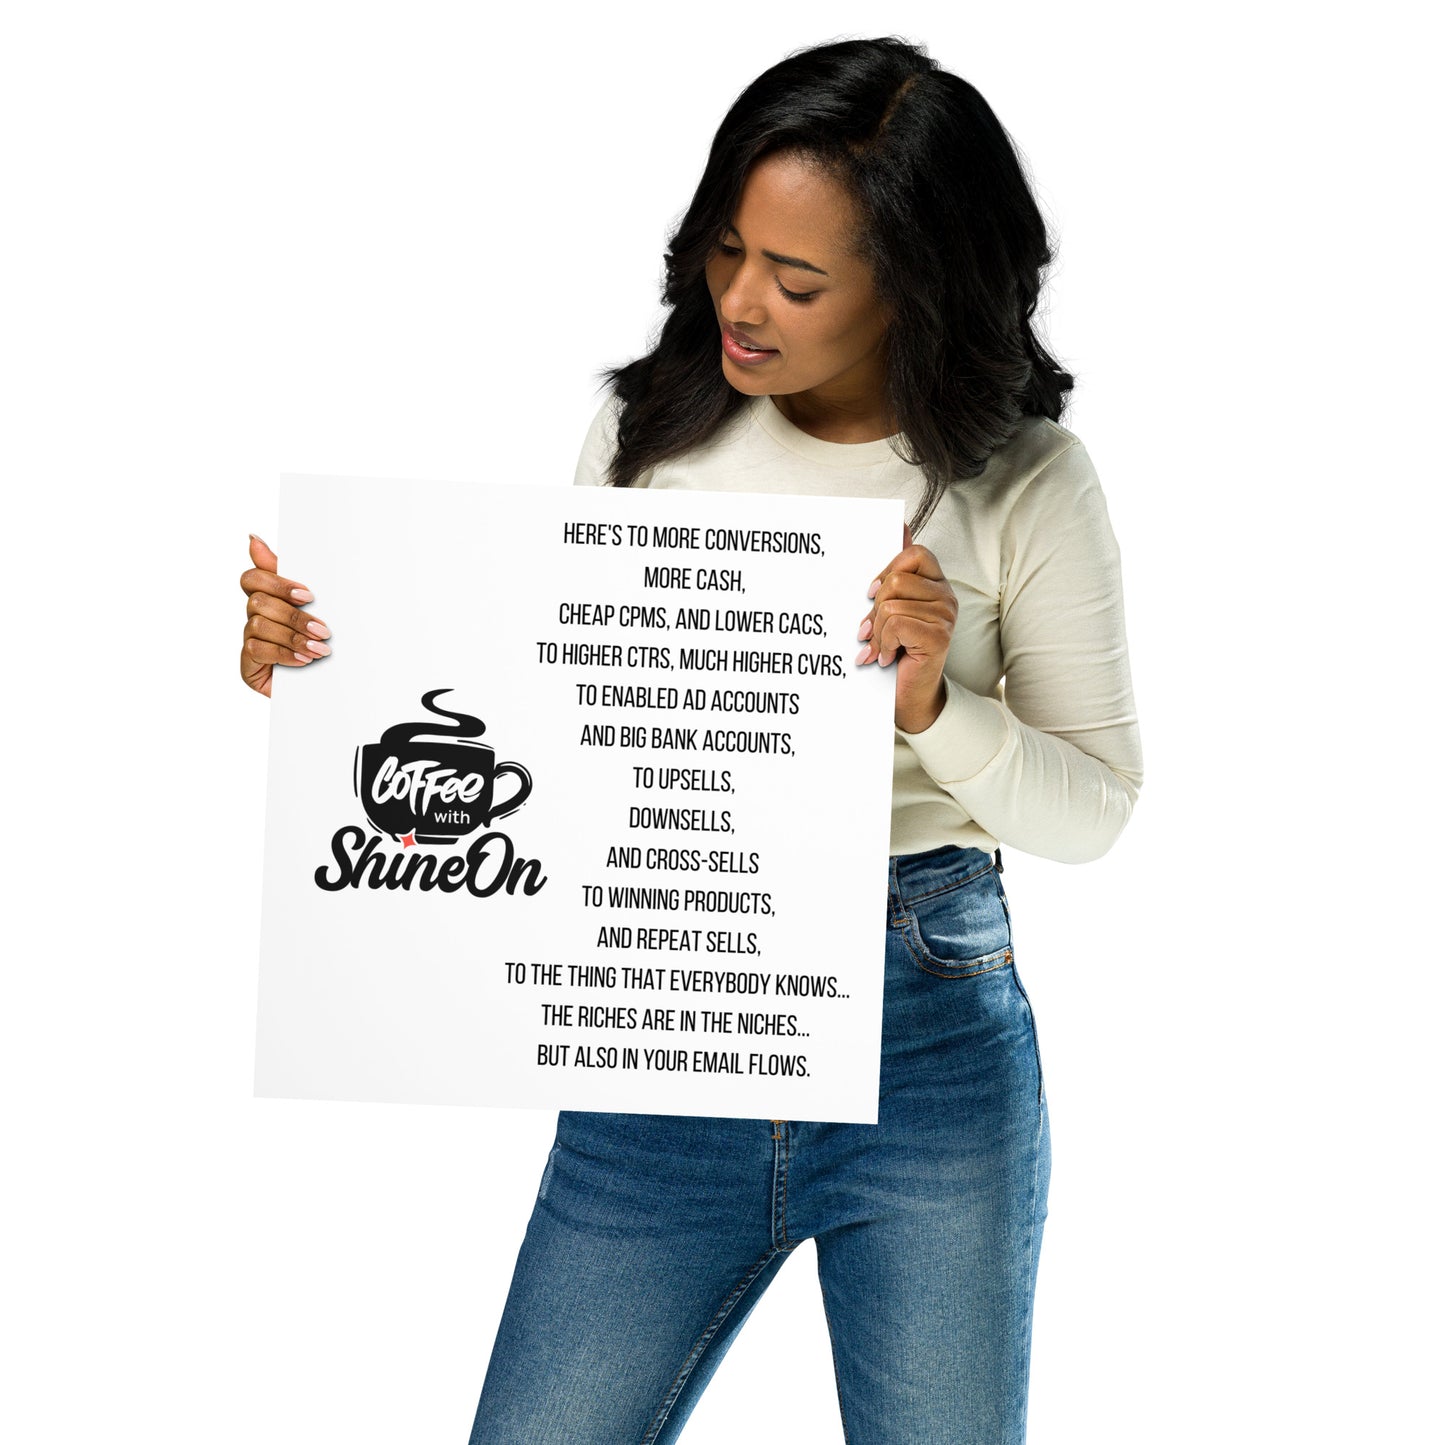 Digital Marketer's Toast, Coffee with ShineOn Poster